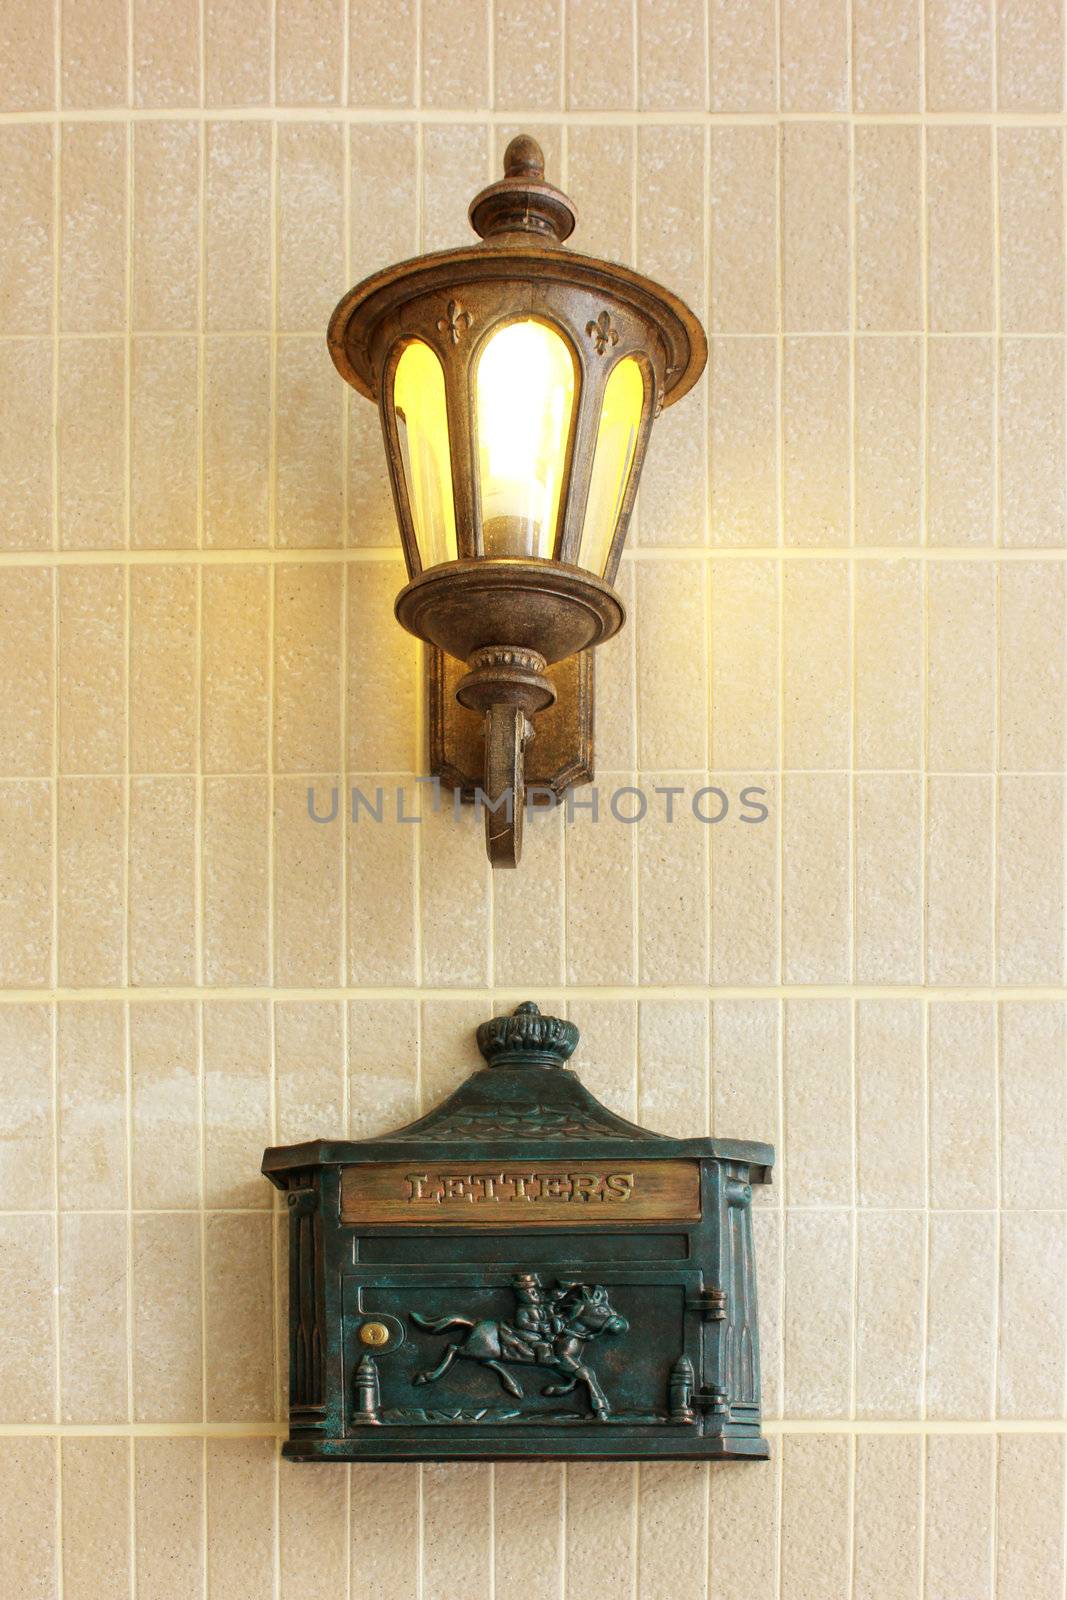 Vintage street lamp with letter box on wall